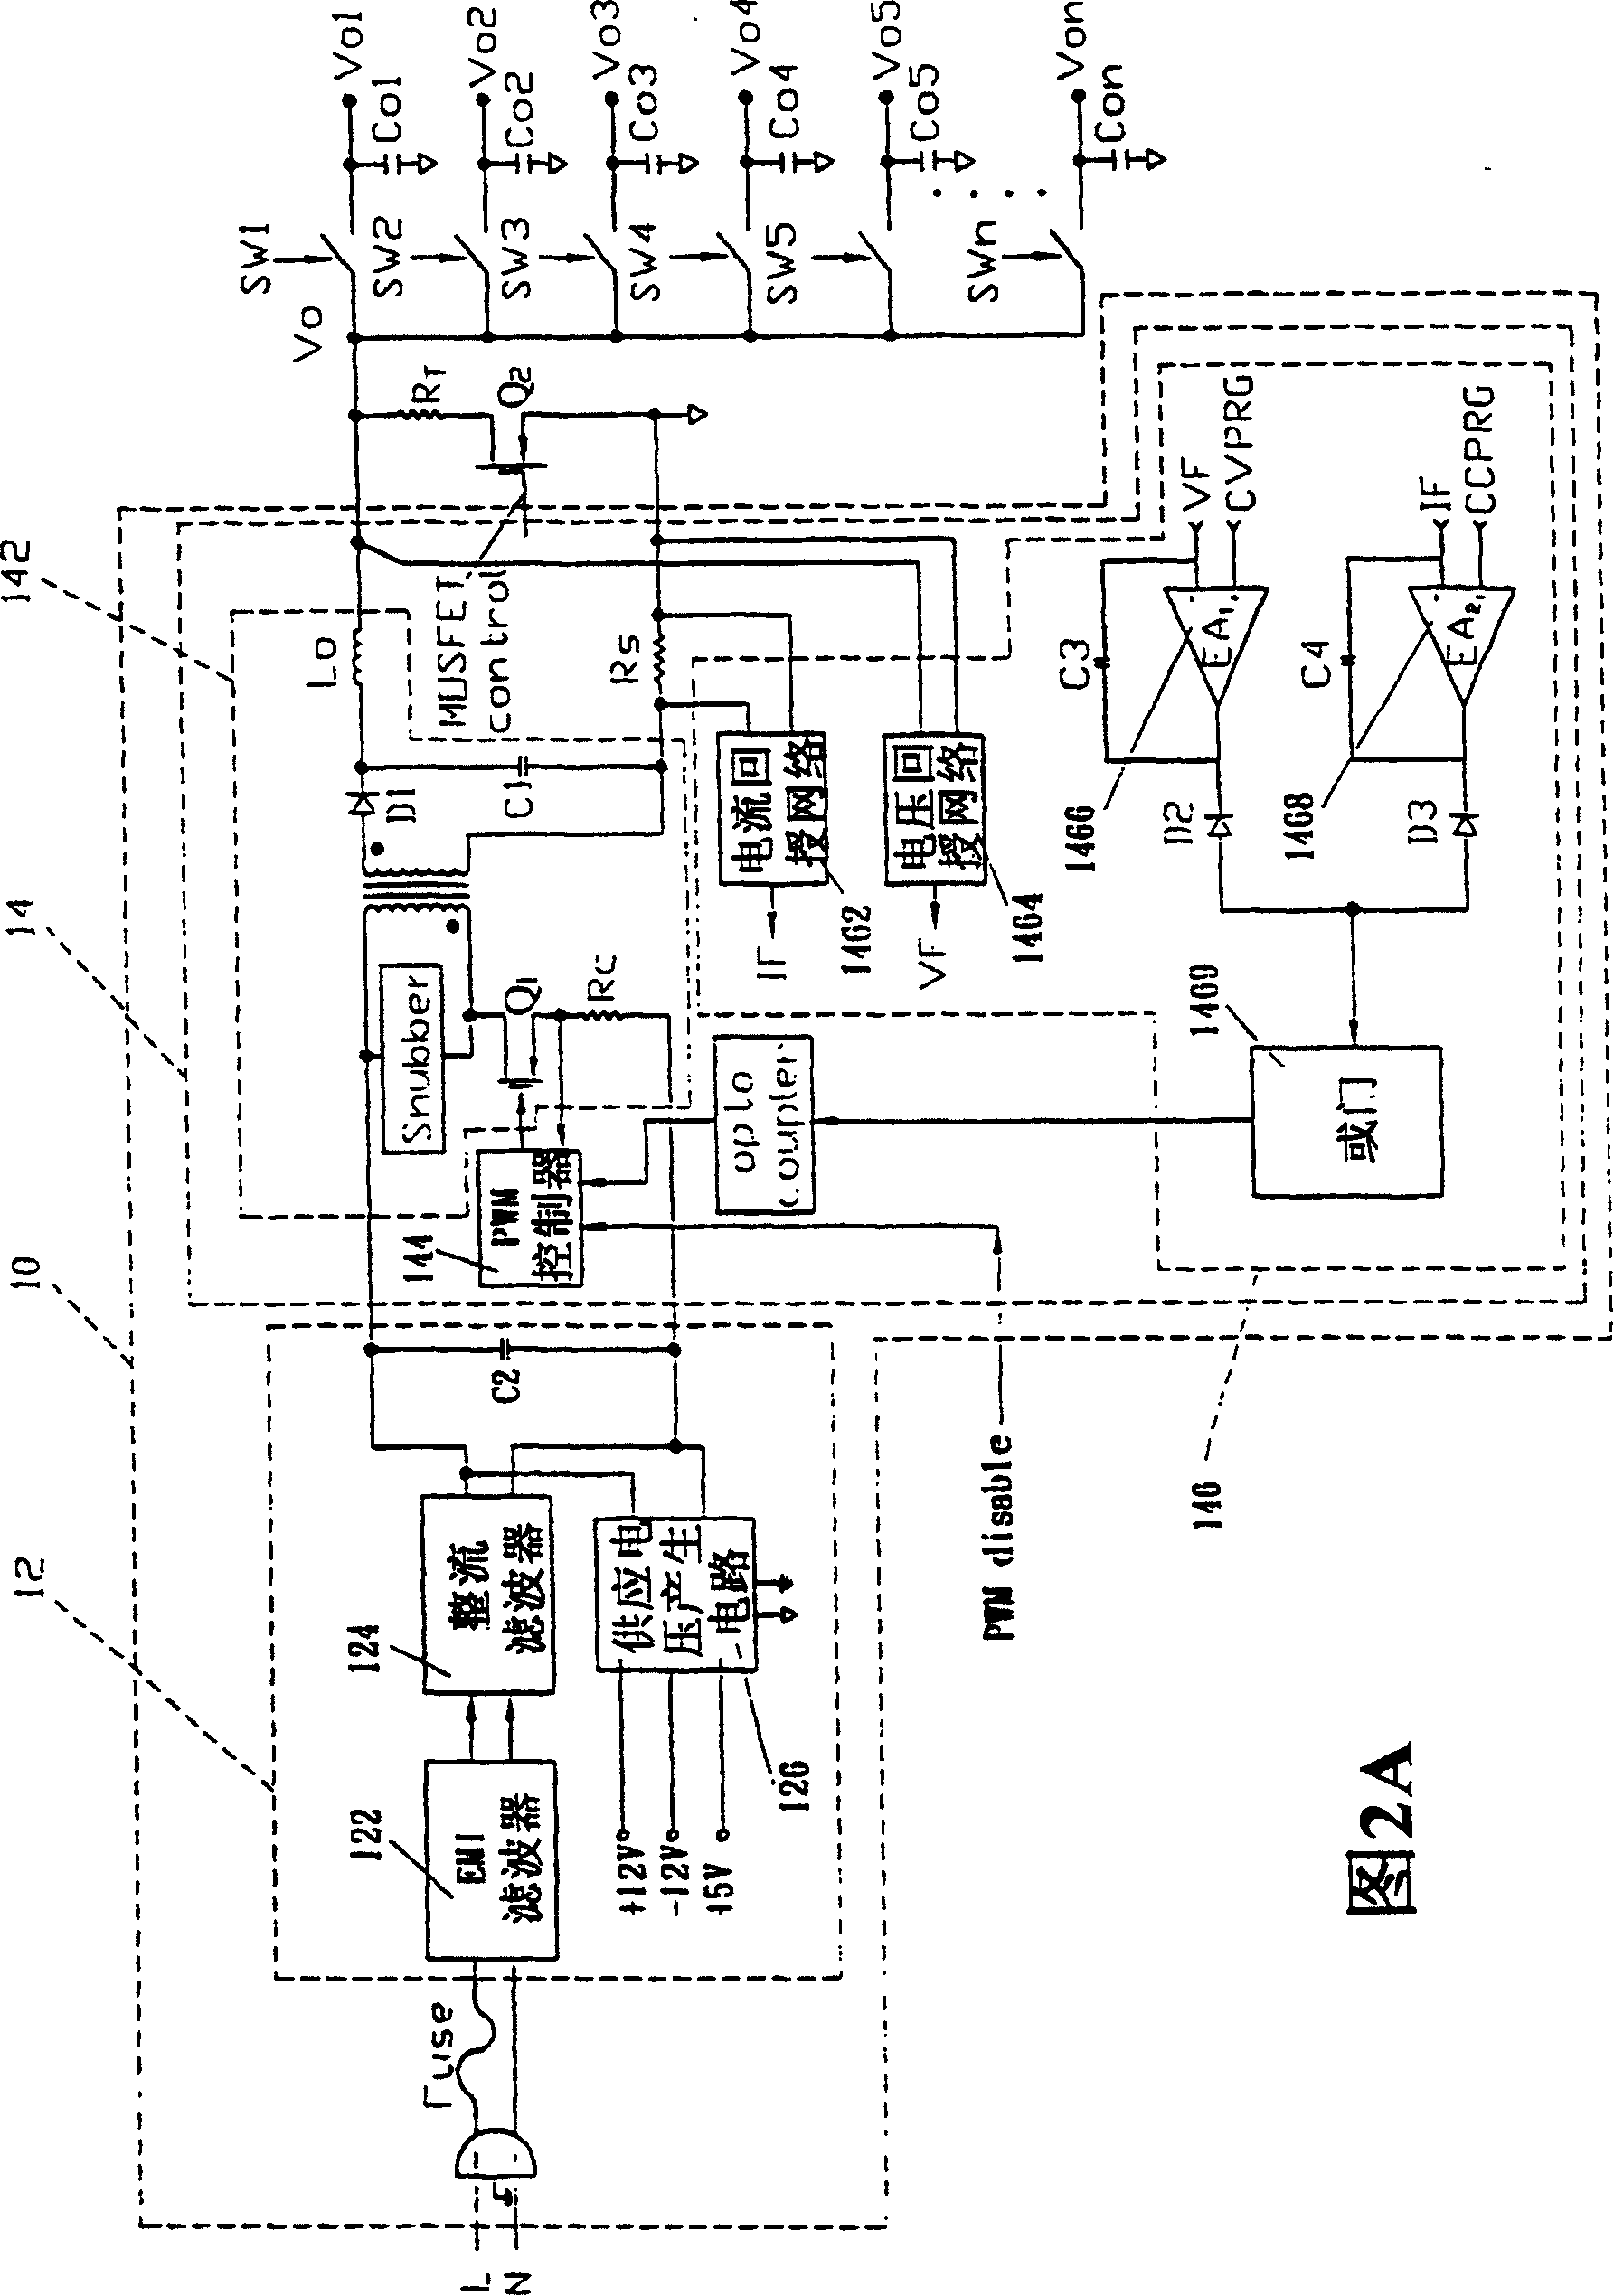 Program-controlled universal charging device